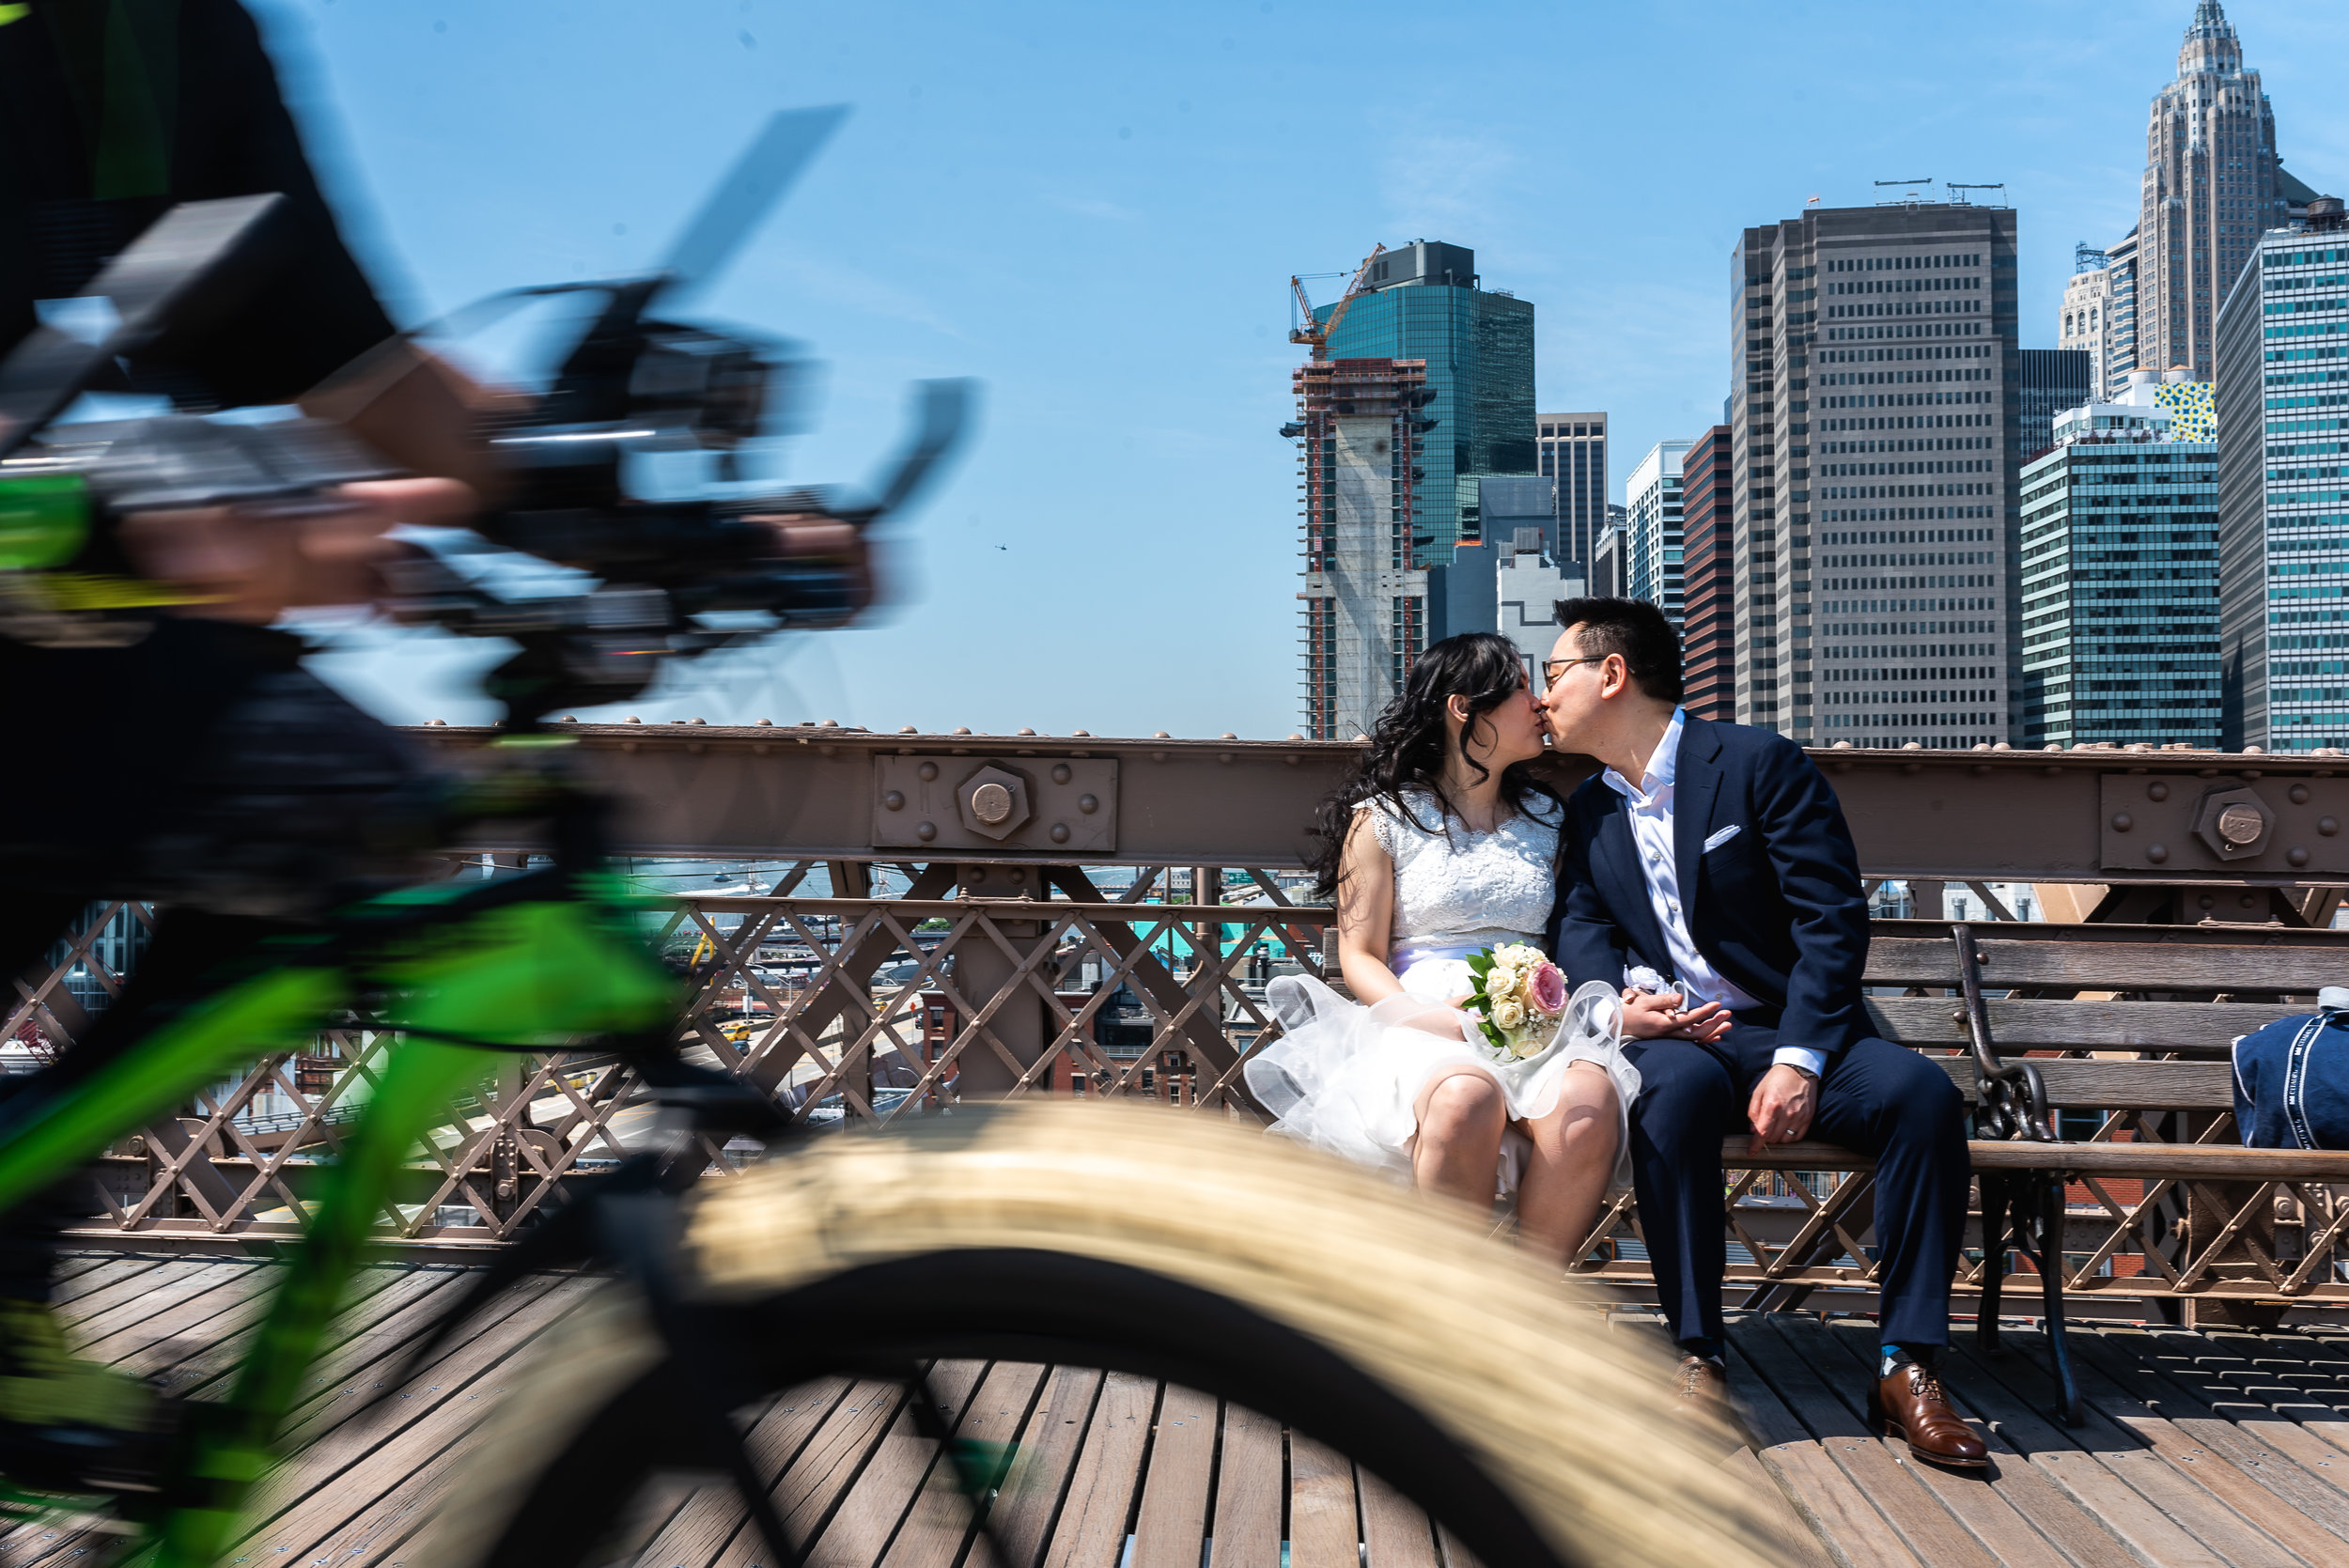 Bikes rolling past on the Brooklyn Bridge while the bride and groom kiss right after their City Hall Ceremony